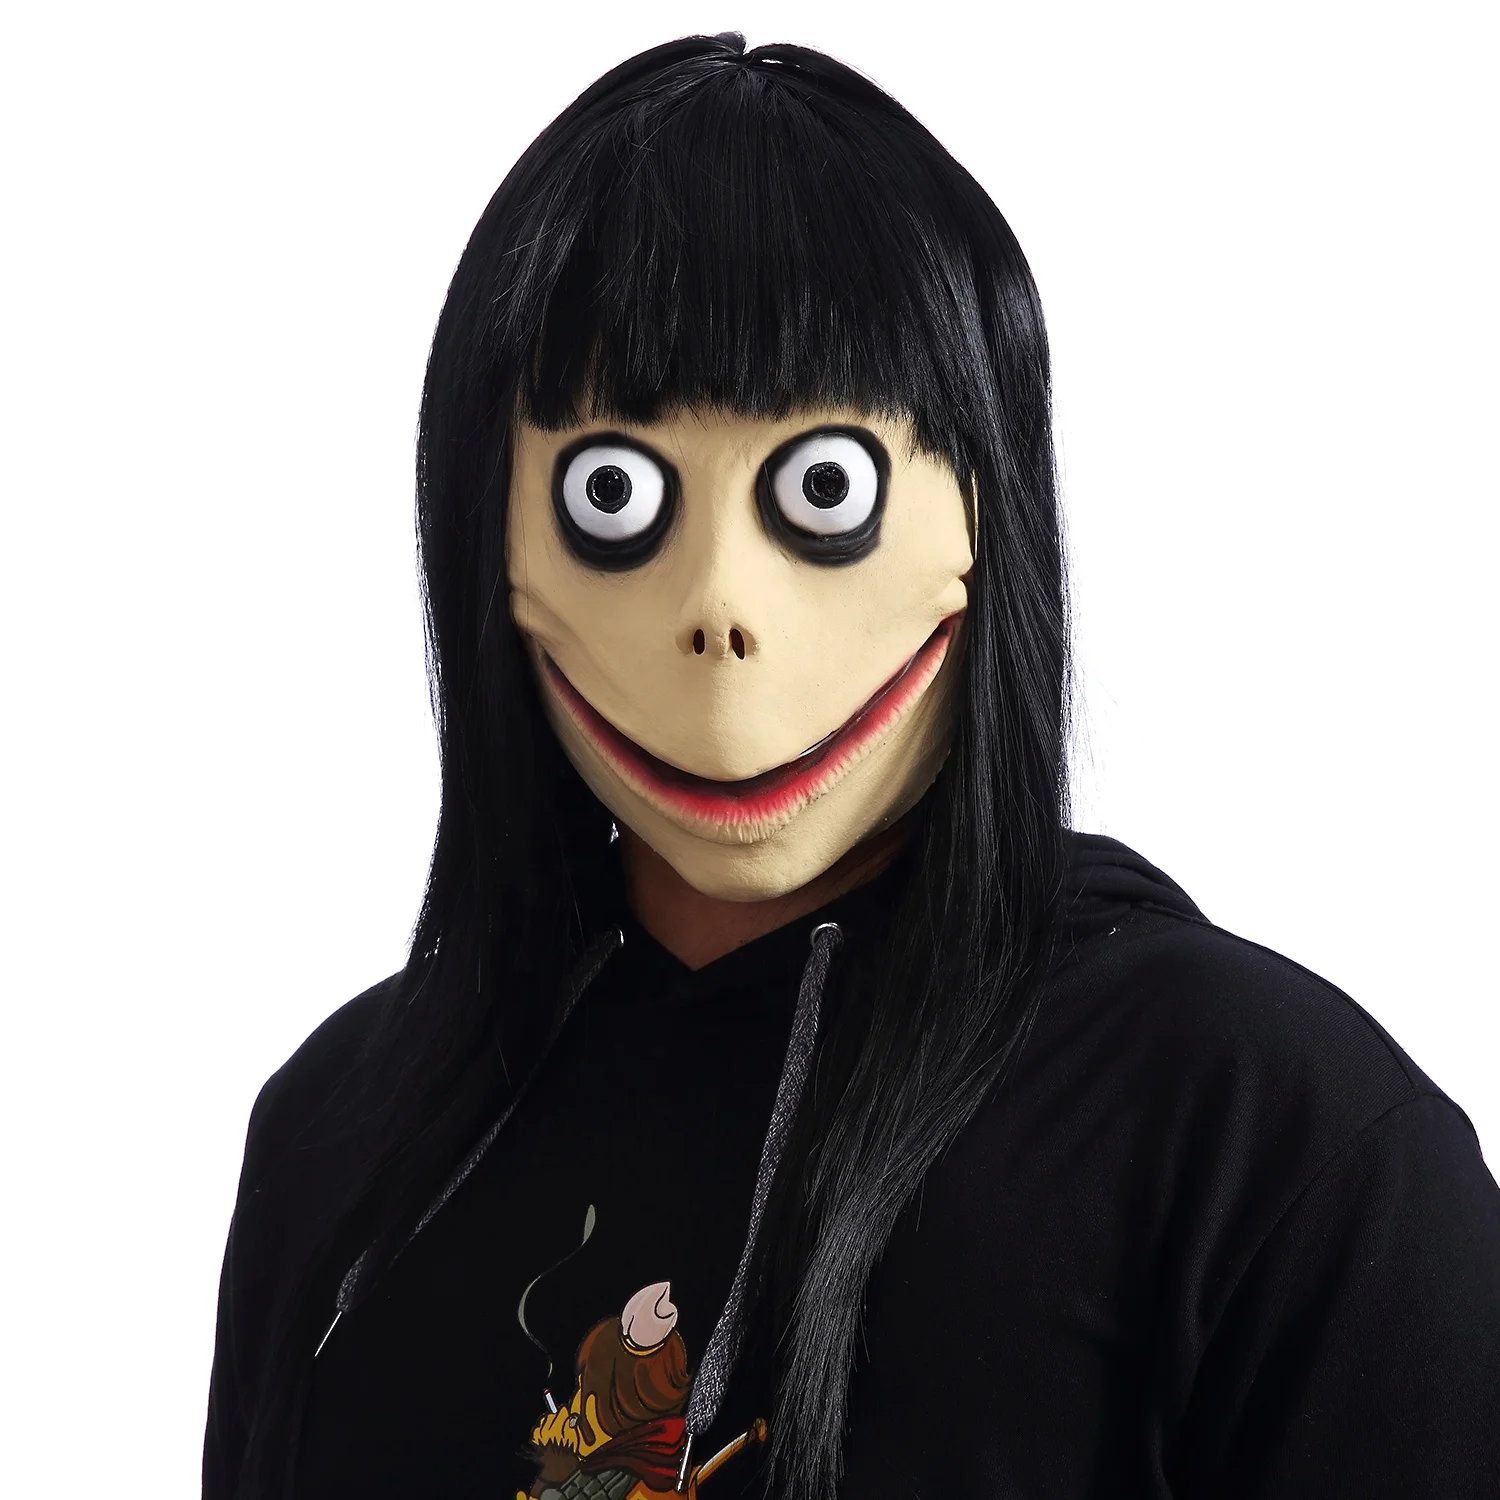 Creepy Mask Scary Games Evil Latex Mask With Long Hair Halloween Party Props Momo Mask Brown Overhead With Wig Buy Julymoda Scary Momo Full Face Novelty Creepy Momo Mask